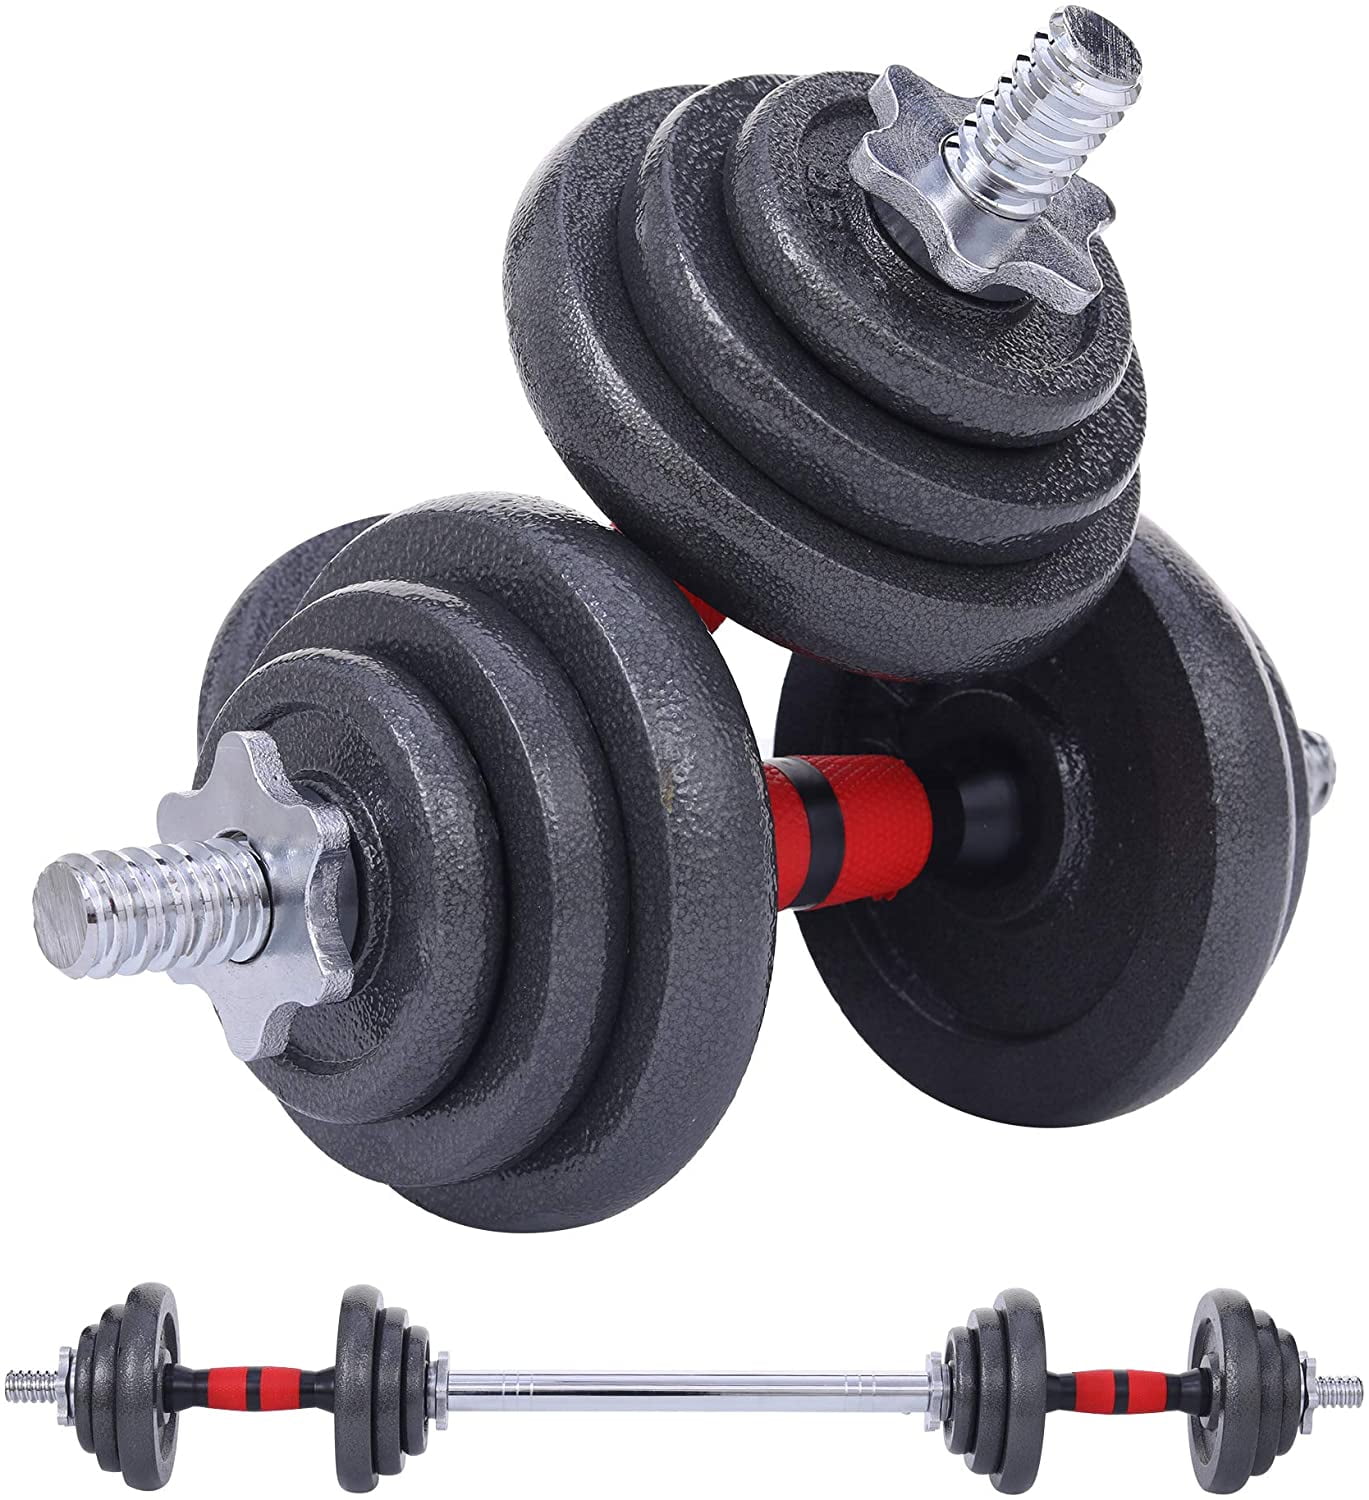 Curl Bar with Weights Dumbbell Set for Men and Women Non-Rolling Double Bolts Barbell Weights Set for Home Gym DOUBLX Adjustable Dumbbell Sets 40 LBS Dumbellsweights Set 